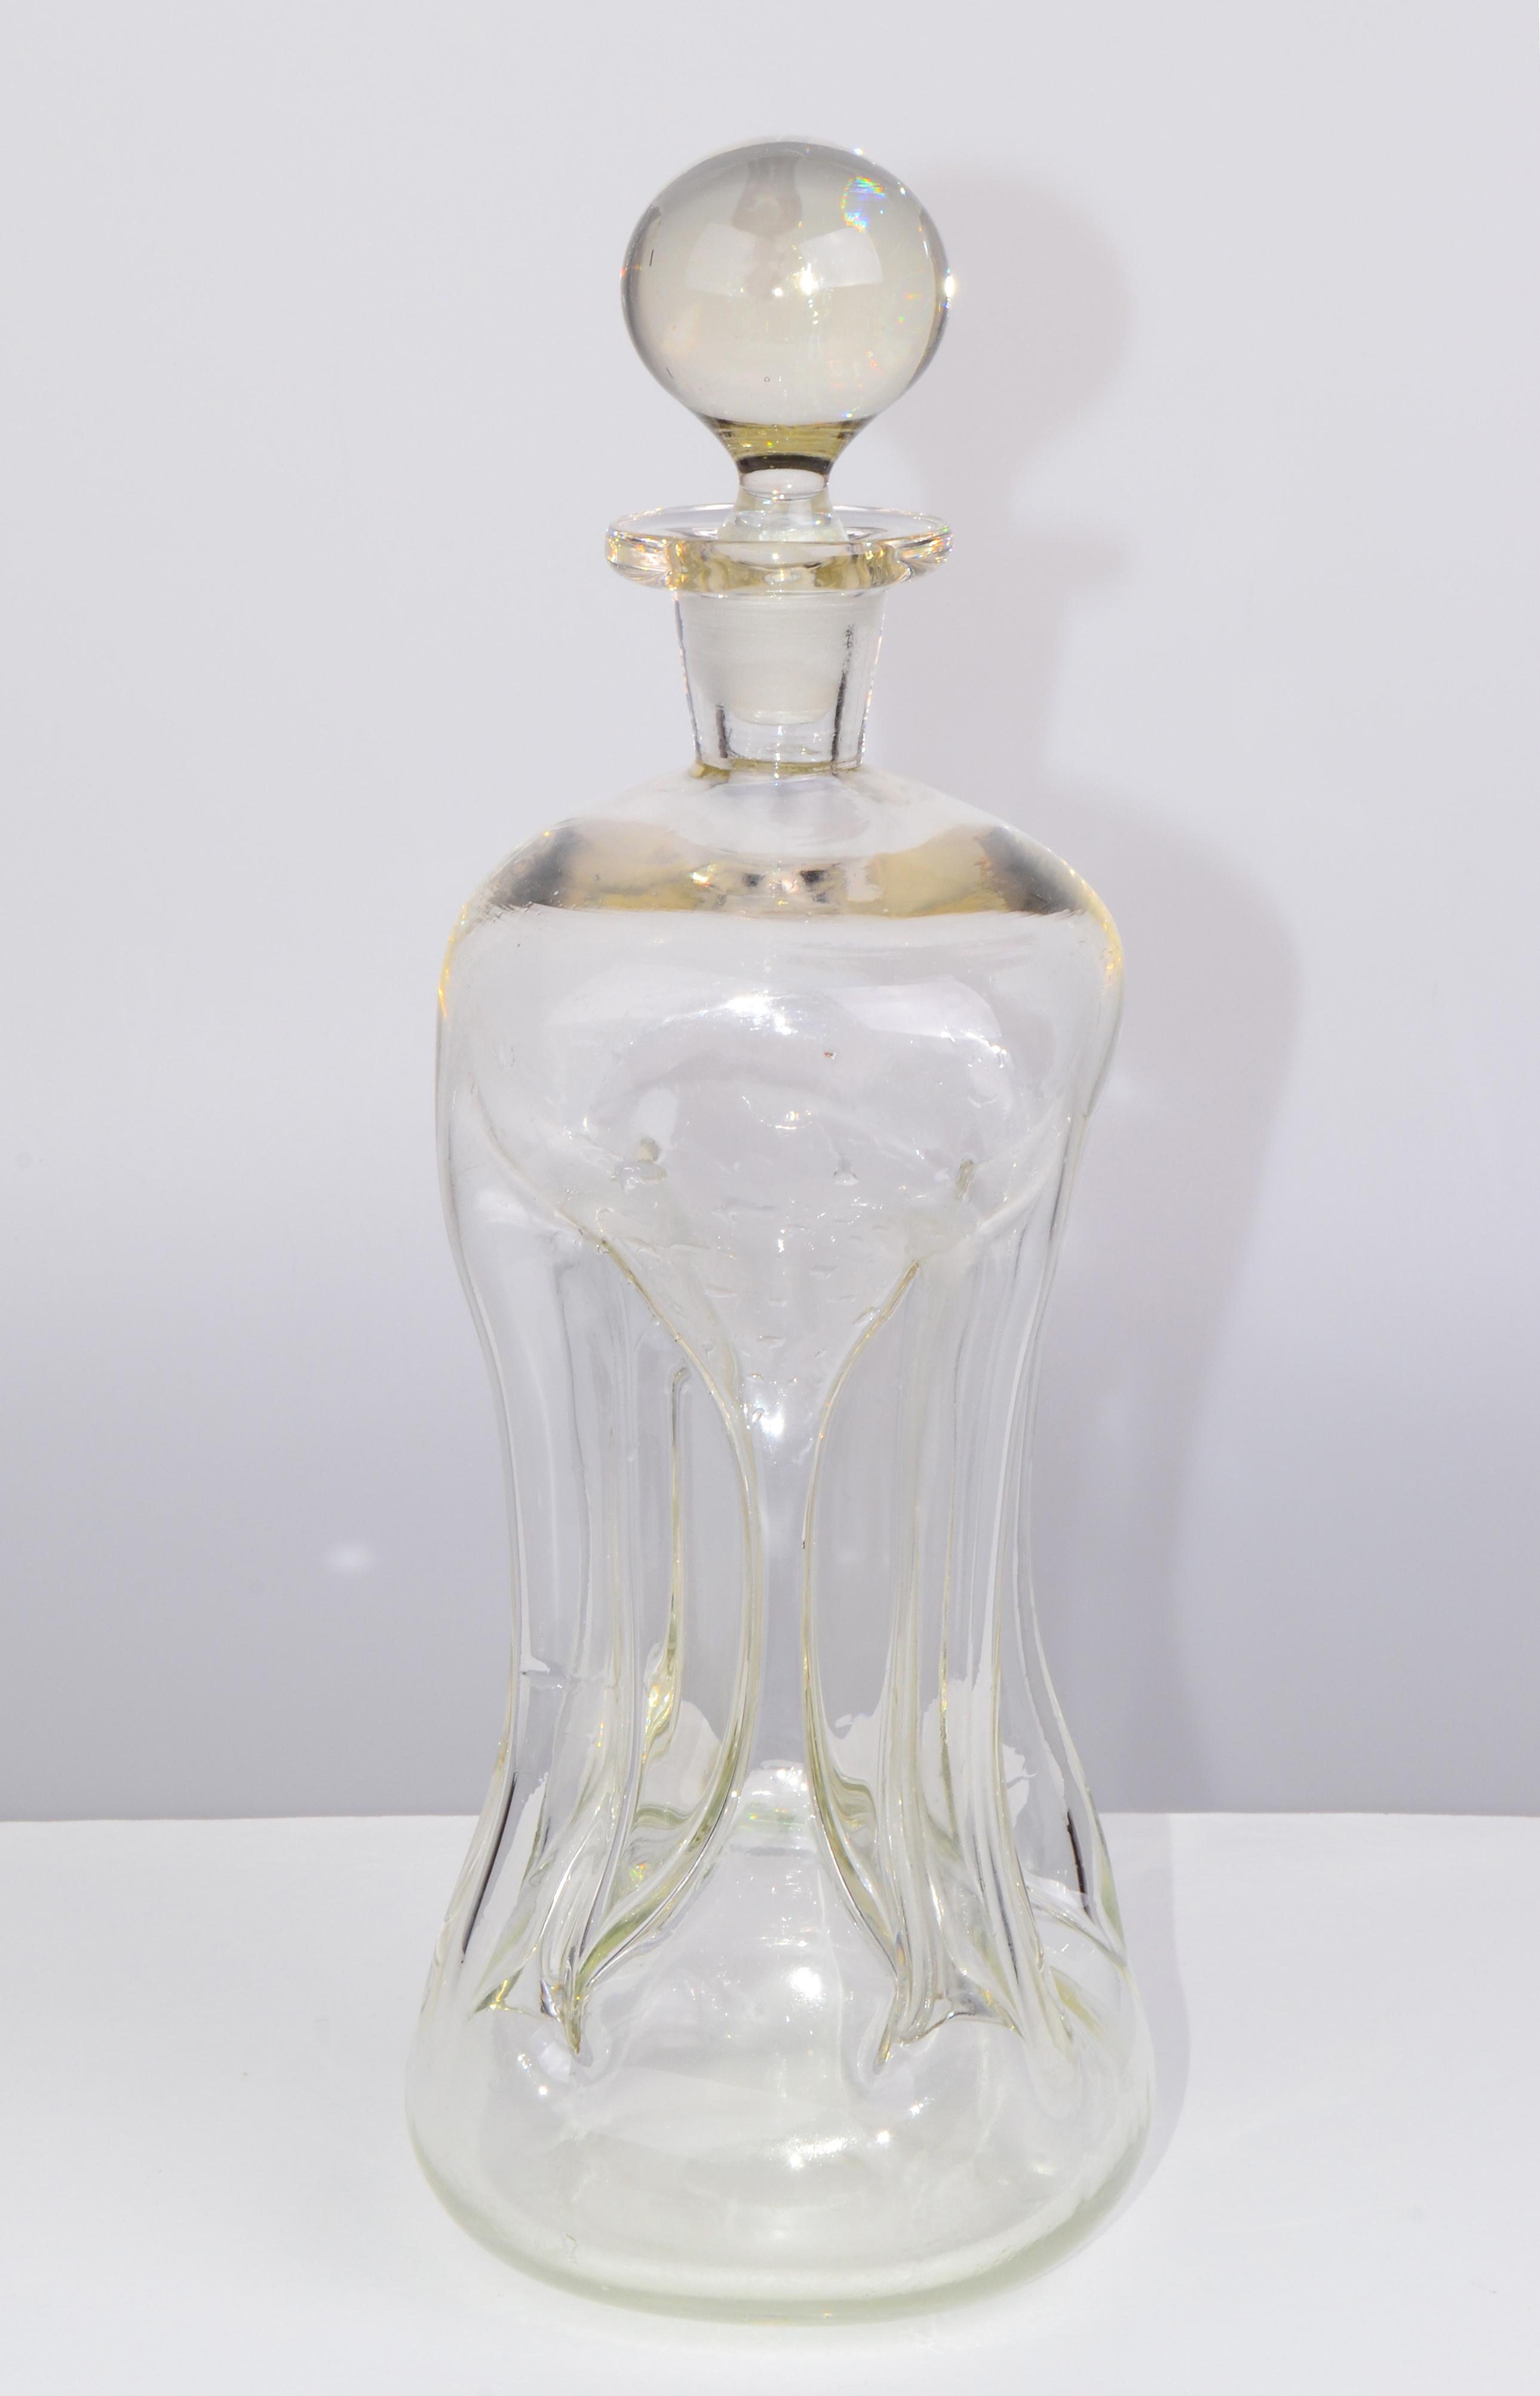 Large Hand-blown glass decanter Kluk Kluk, designed by Jacob E. Bang and made in Denmark circa 1960s. 
Danish architect-designed mouth-blown decanters were made for the glass manufacturer Holmegaard-Kastrup. 
No markings, no labels. A Danish Modern